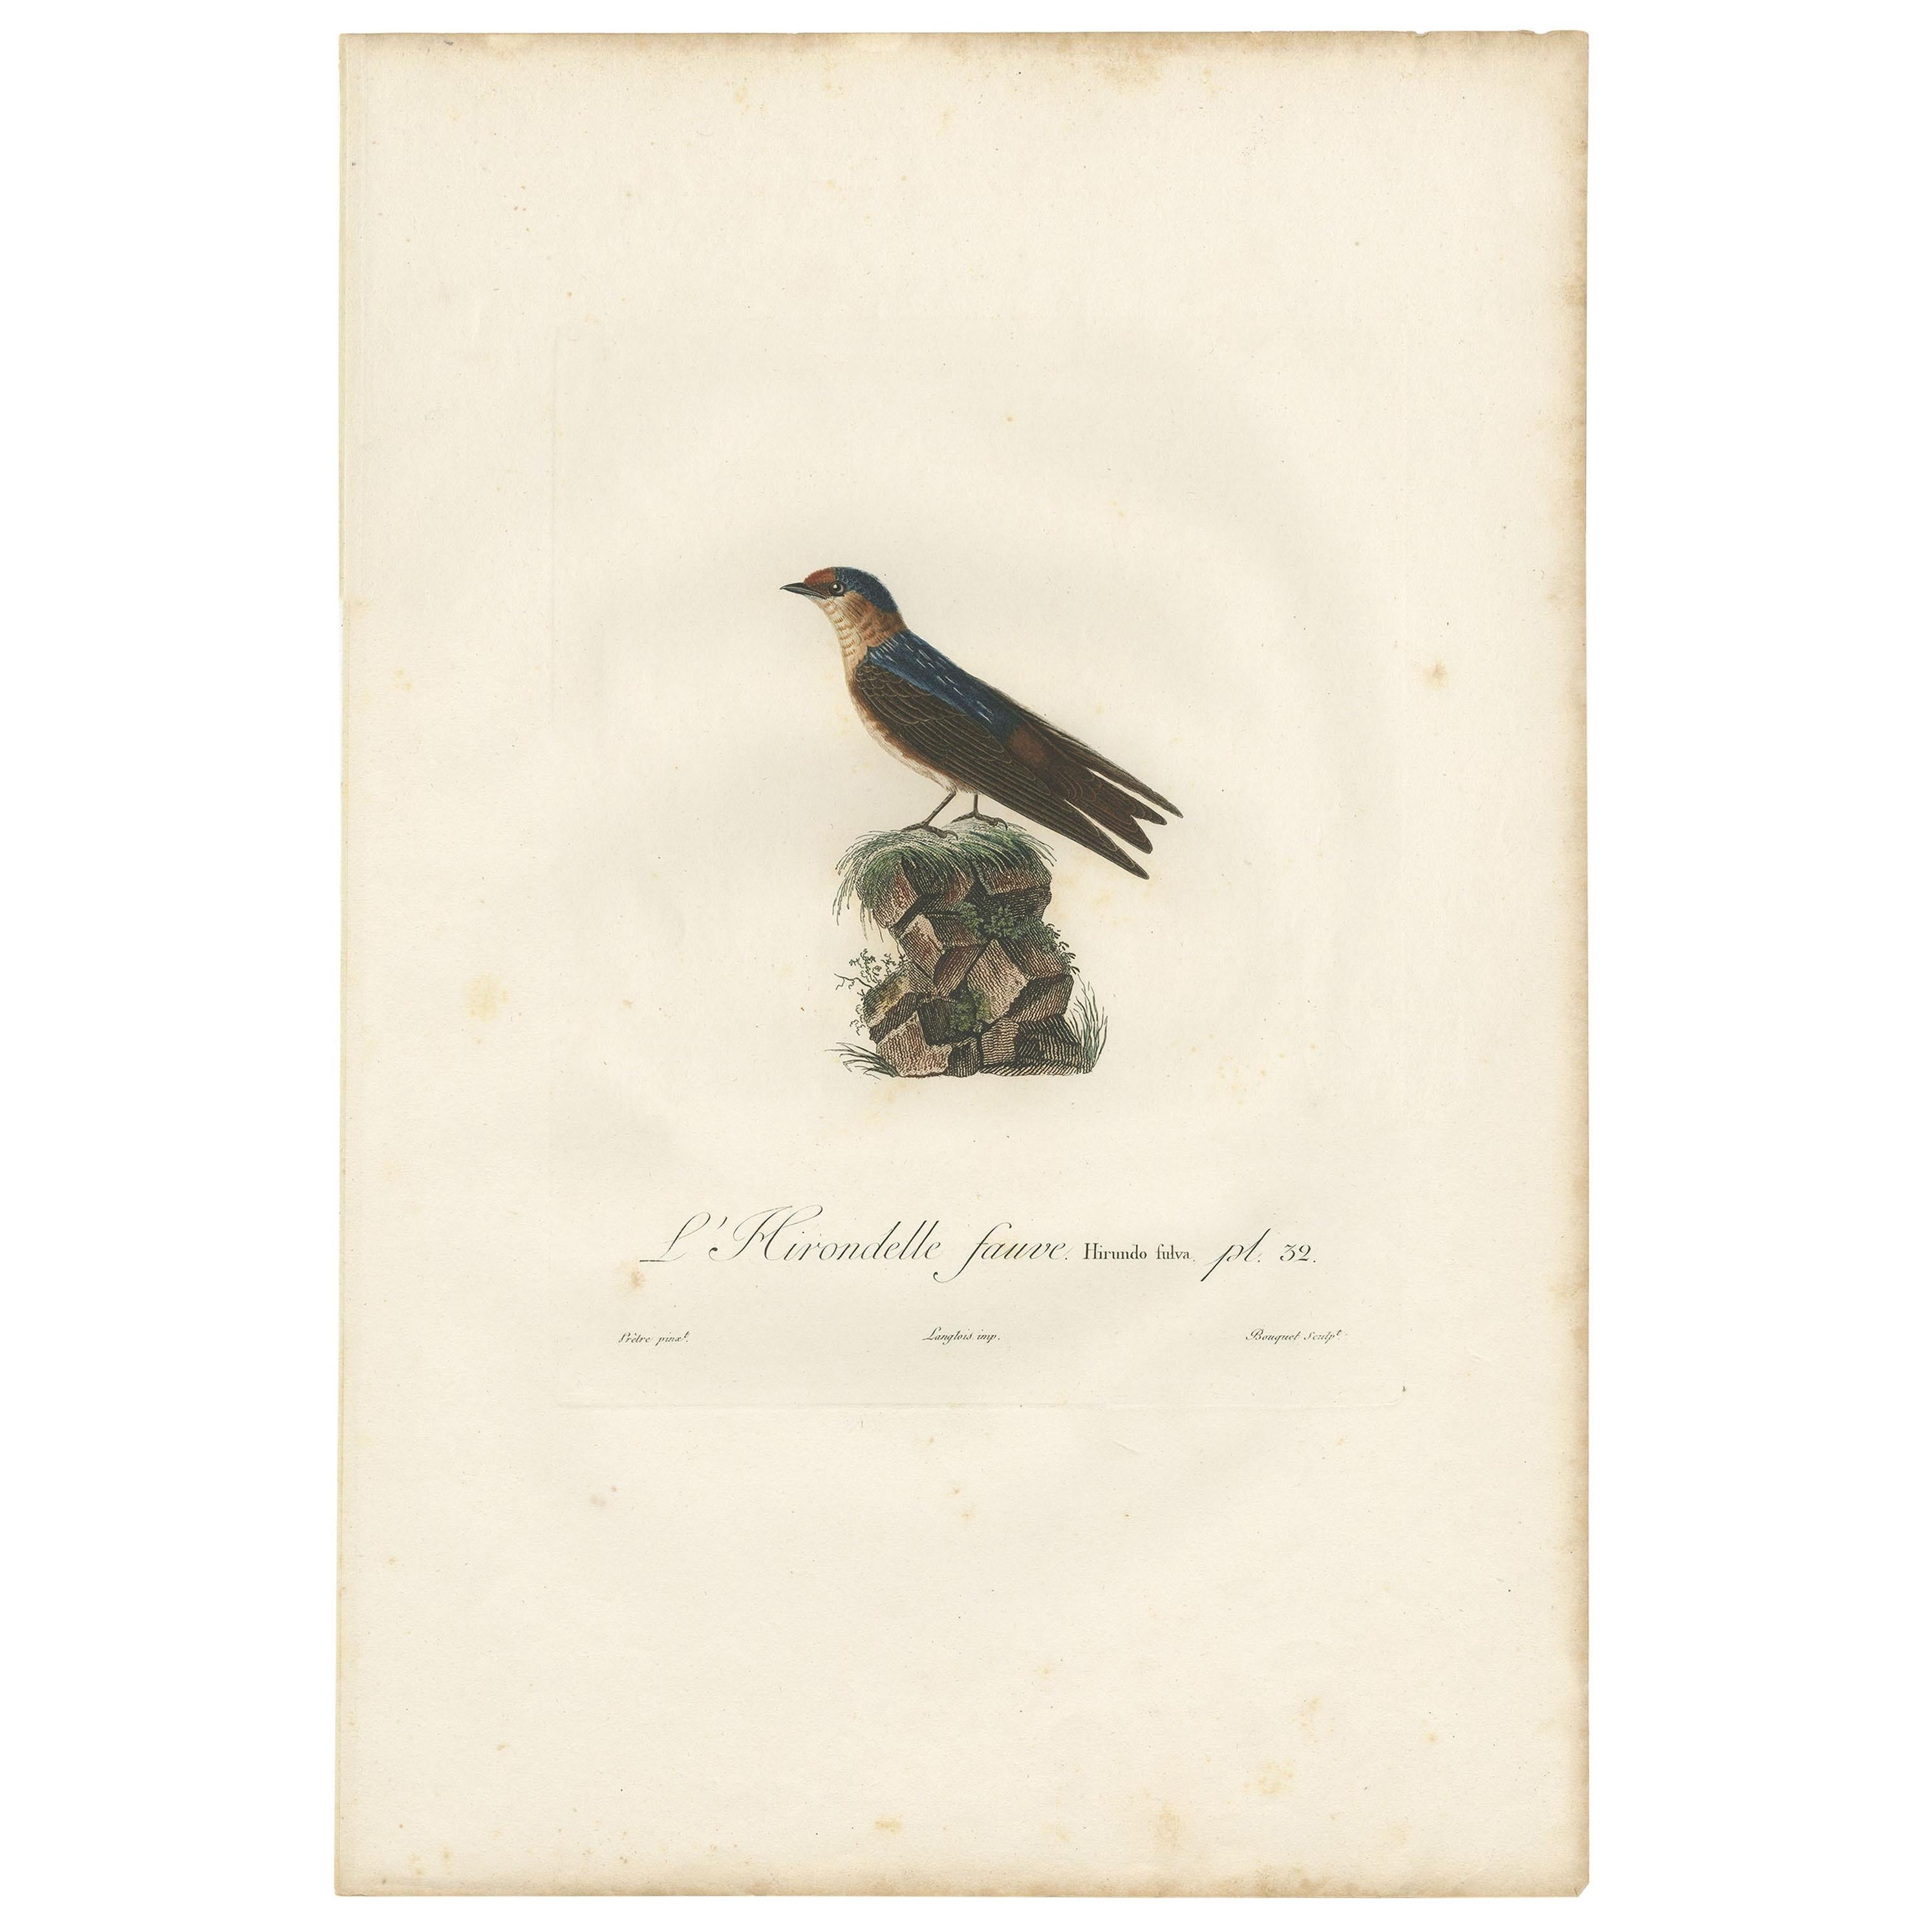 Antique Bird Print of the Cave Swallow by Vieillot, '1807'